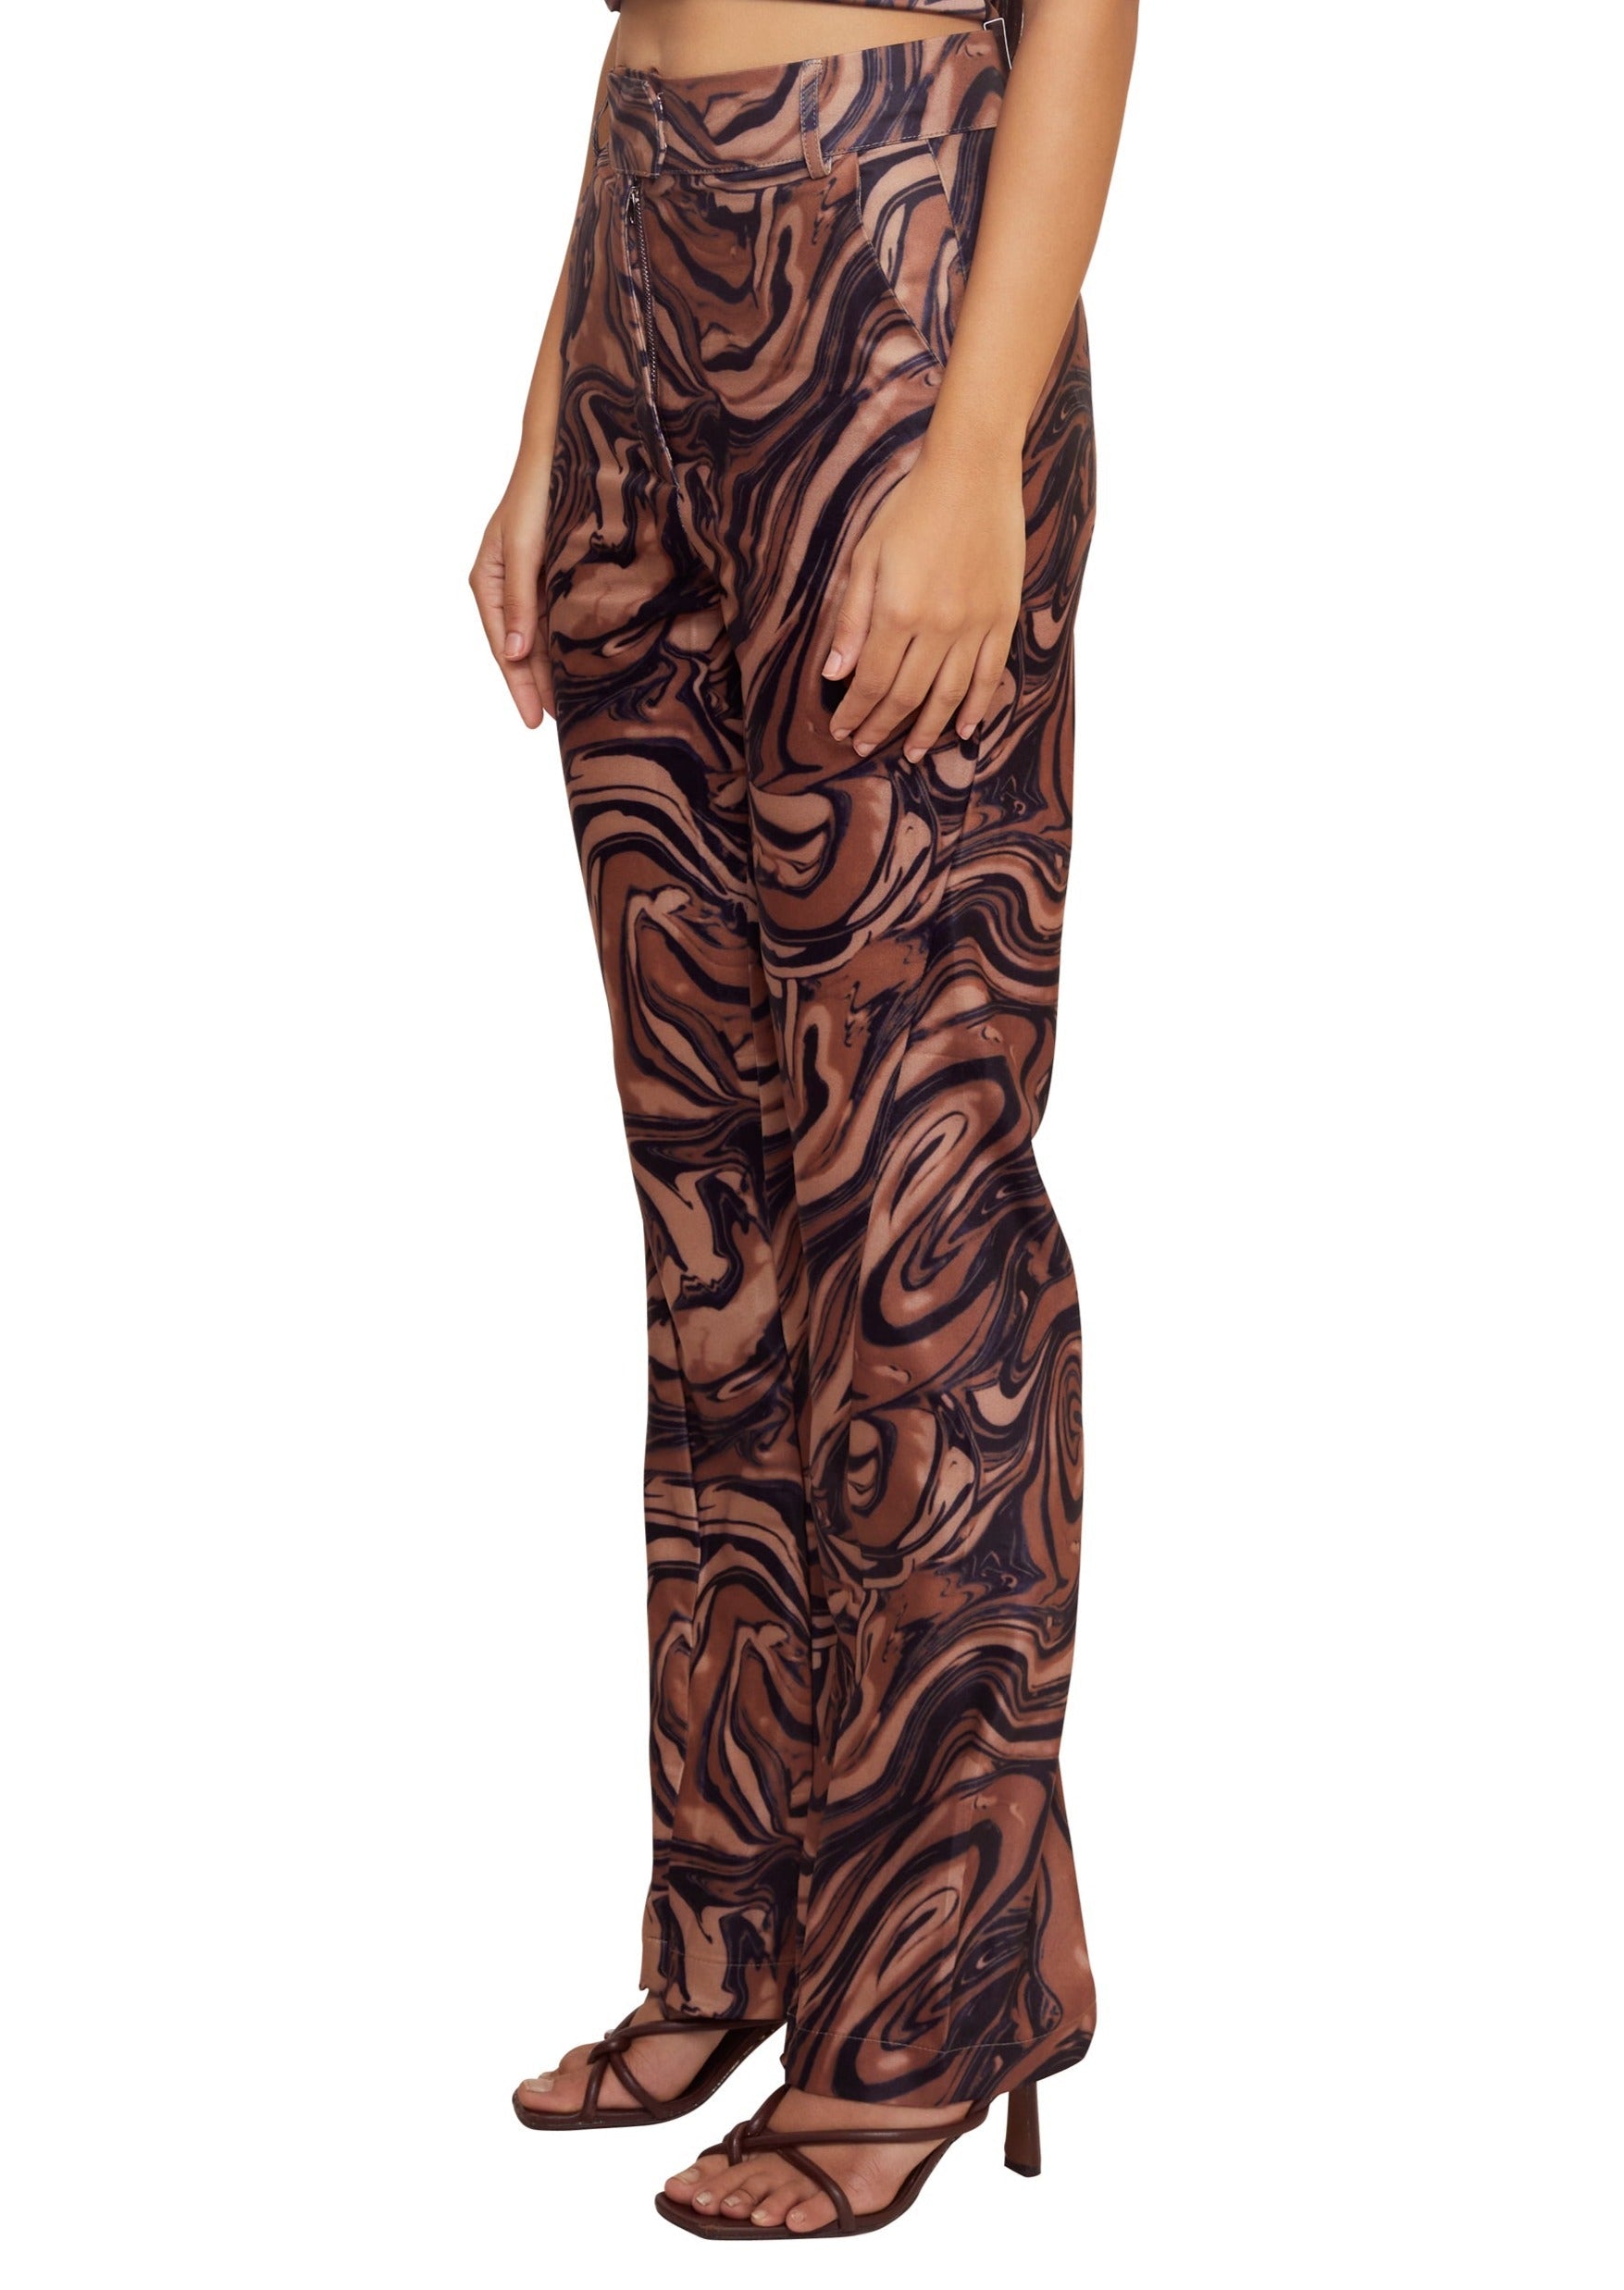 Brown stretchy high waisted flared trousers with an abstract print from House of sunny